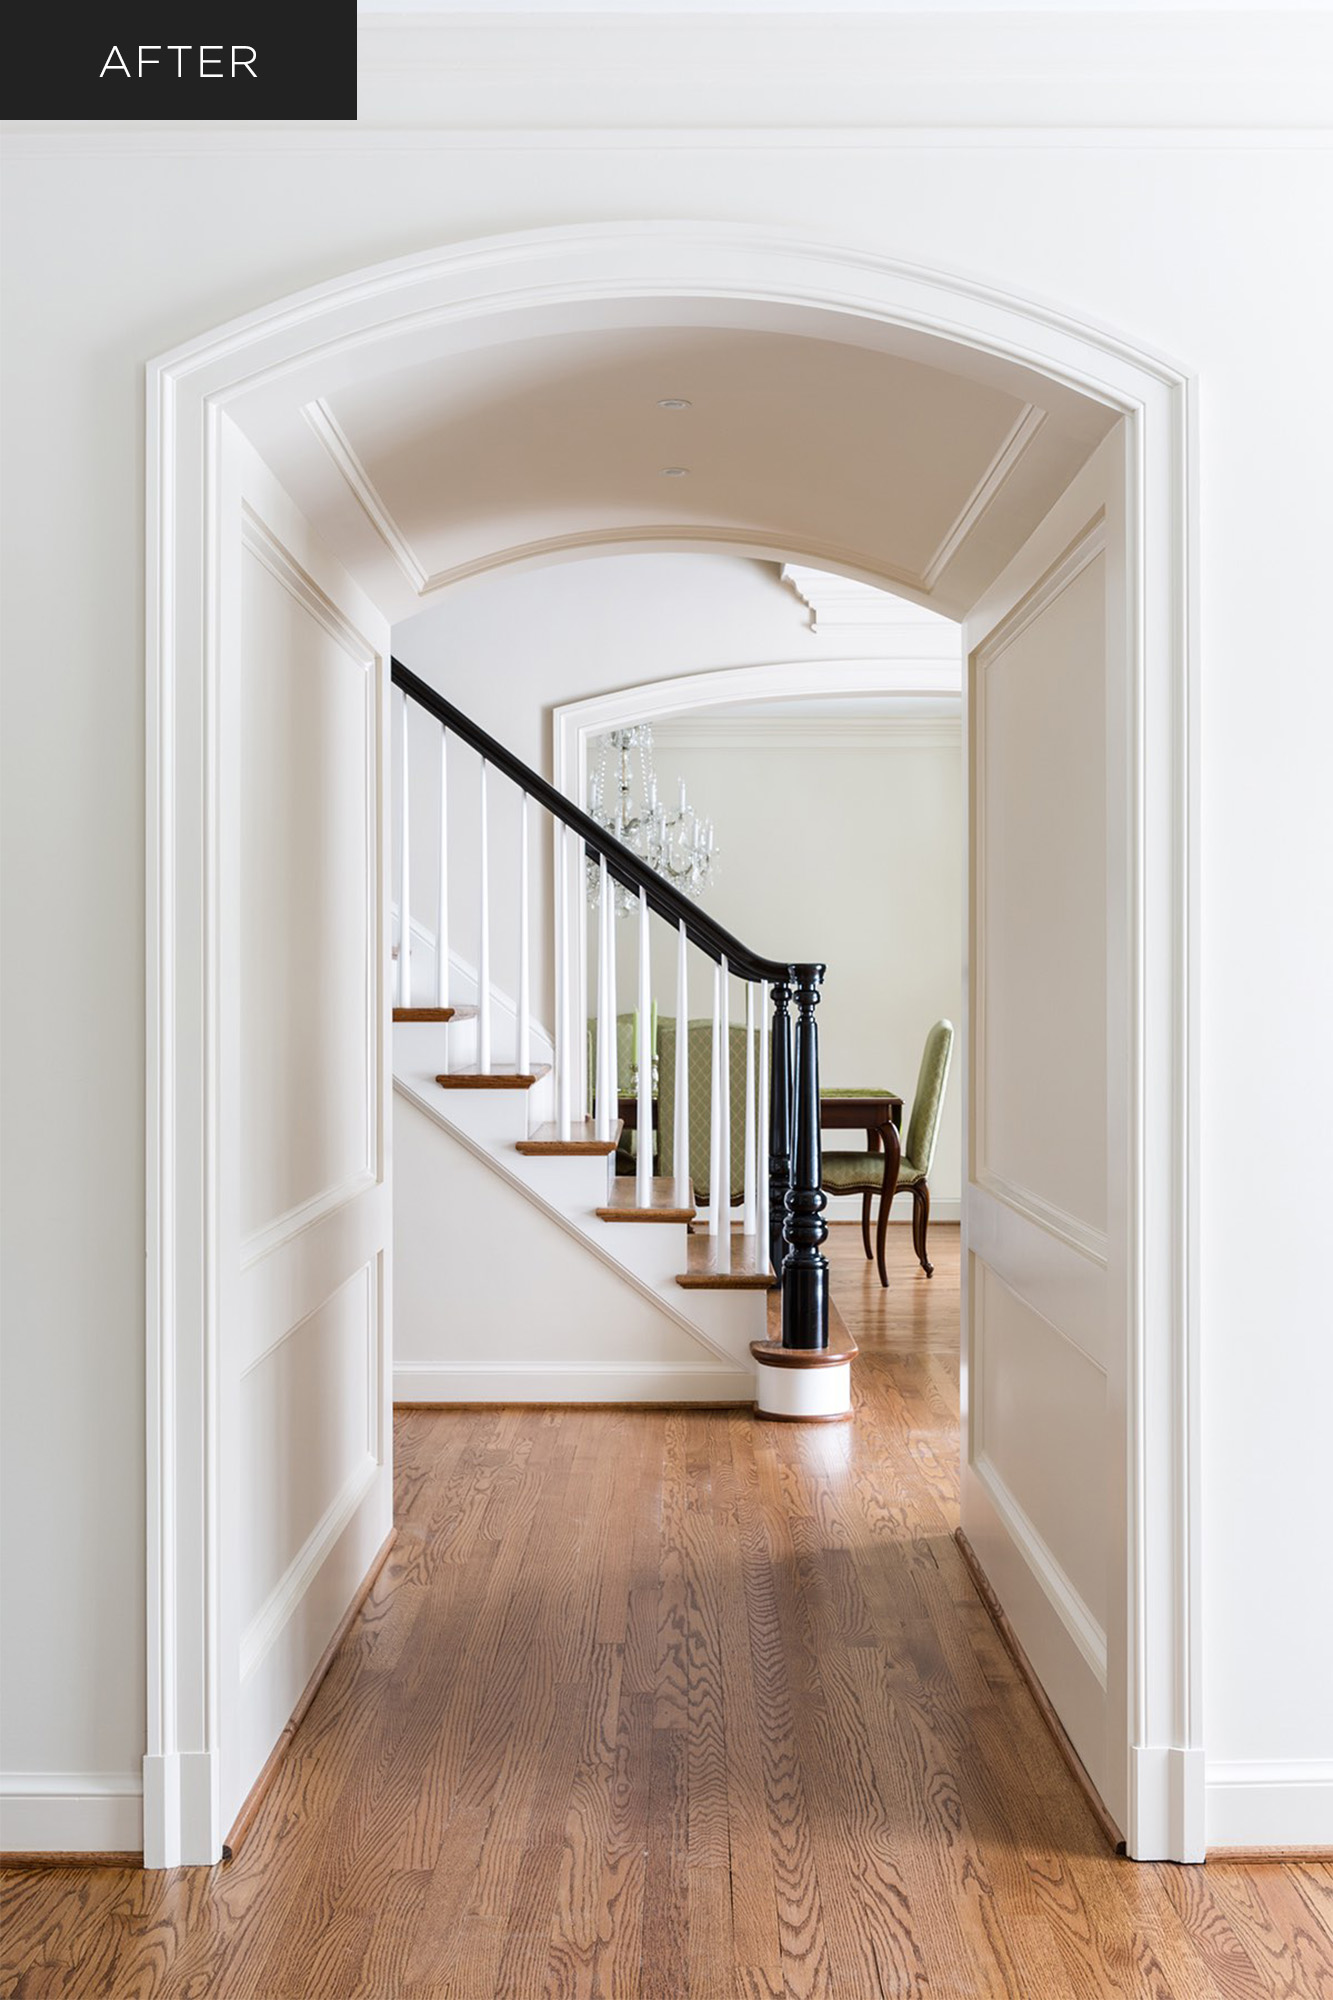 Home with curved archway hall and milled newel post on stairs